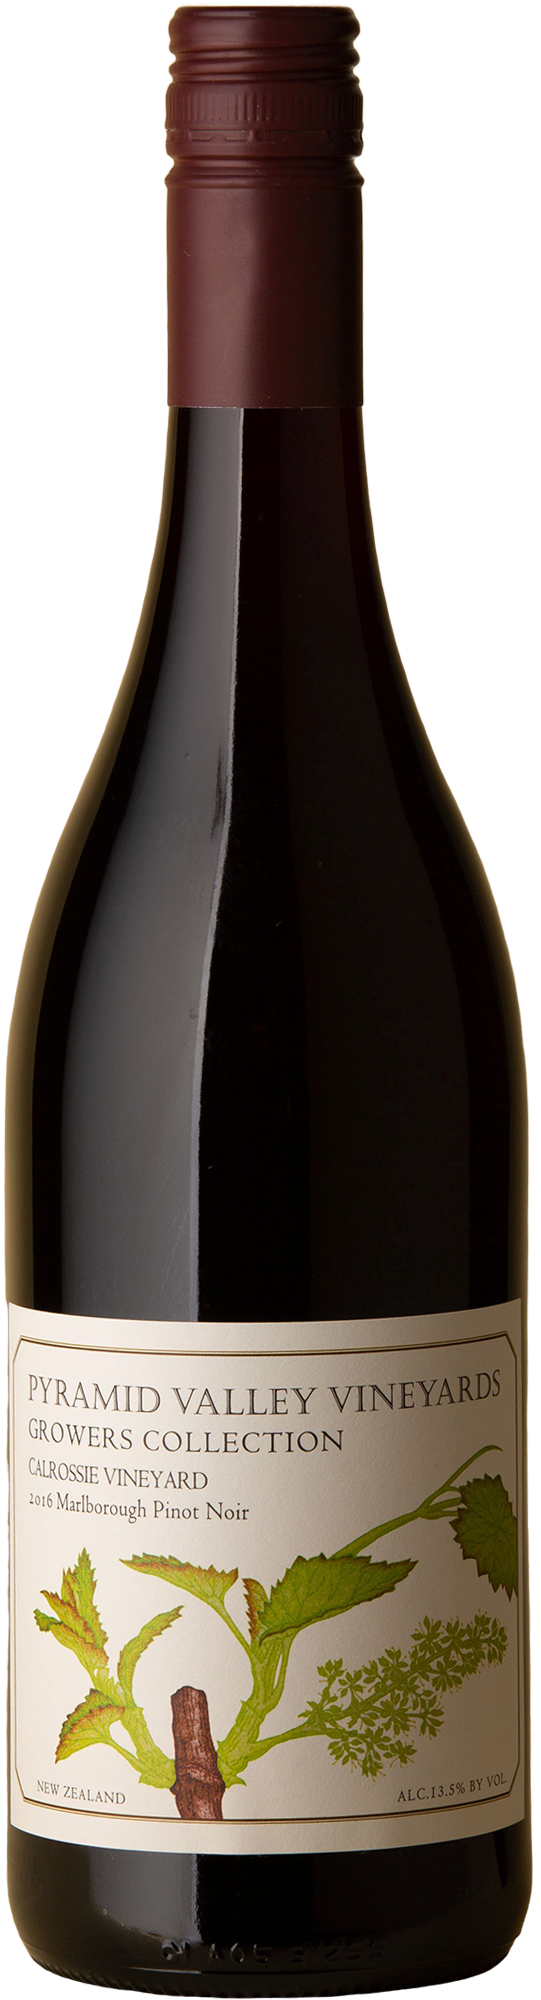 Pyramid Valley - Calrossie Pinot Noir 2016 Red Wine